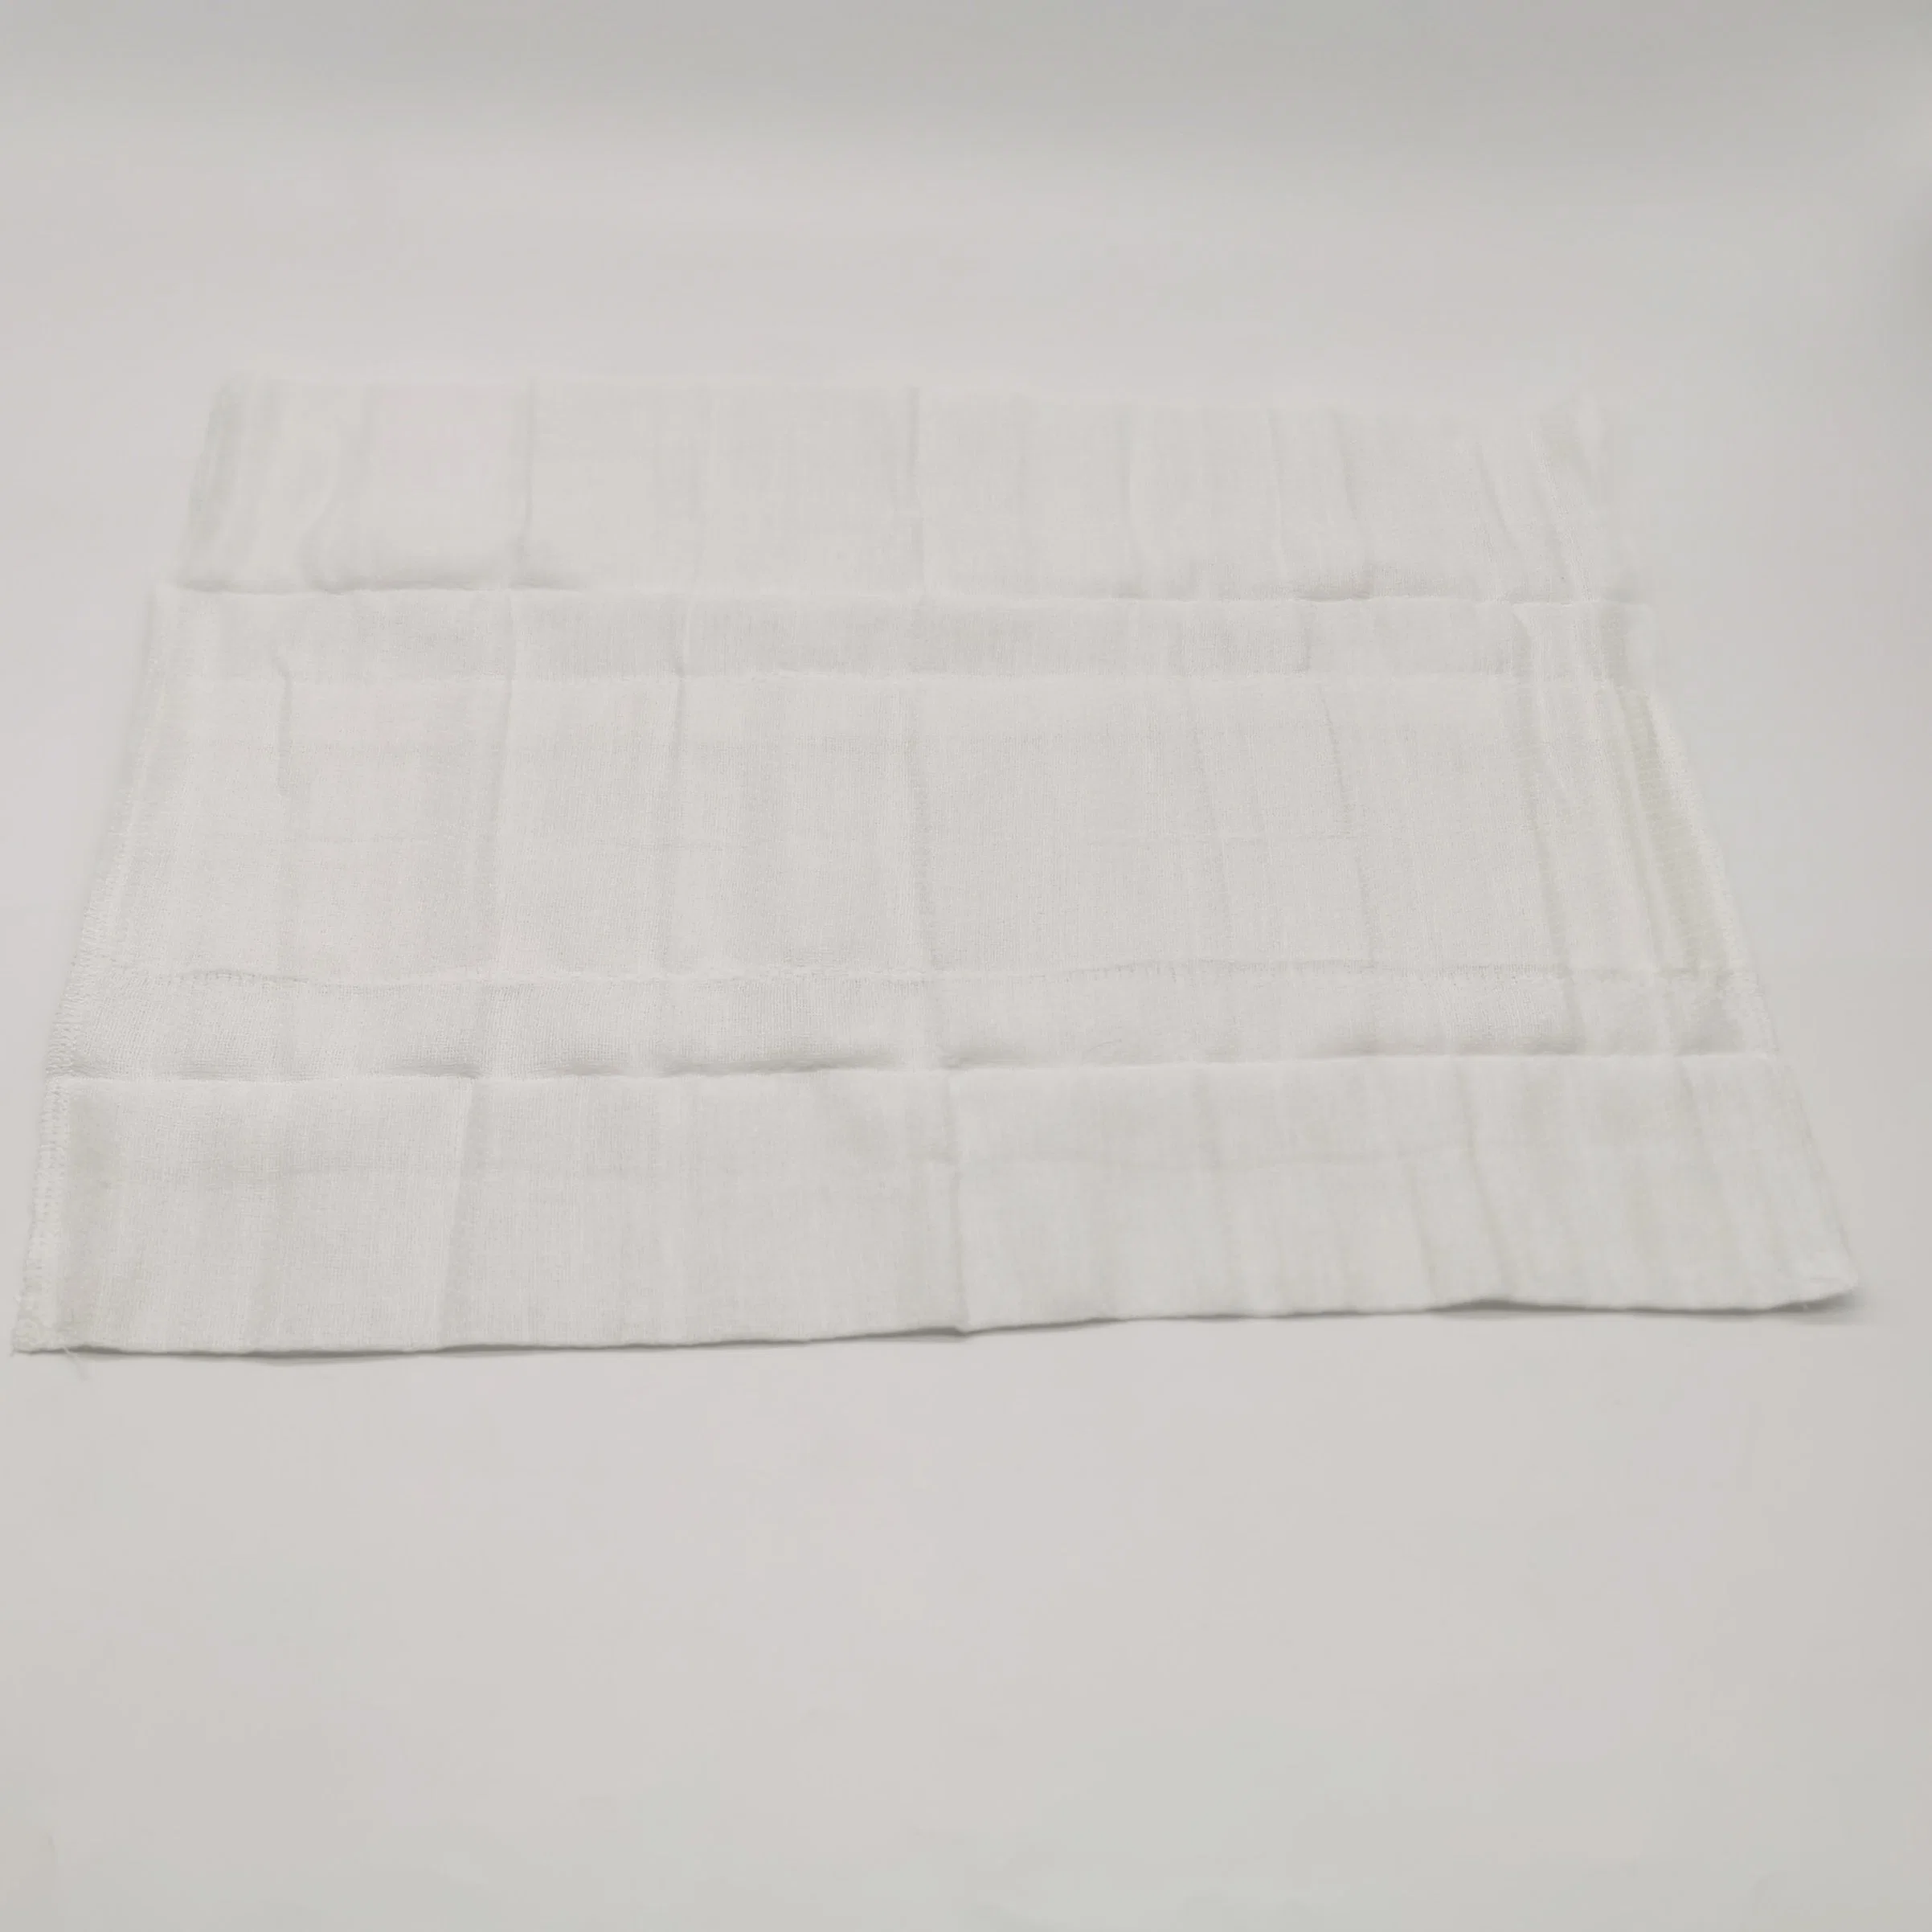 Top Sale Guaranteed Quality White Baby Cotton Muslin Cloth Diaper (with Pad)